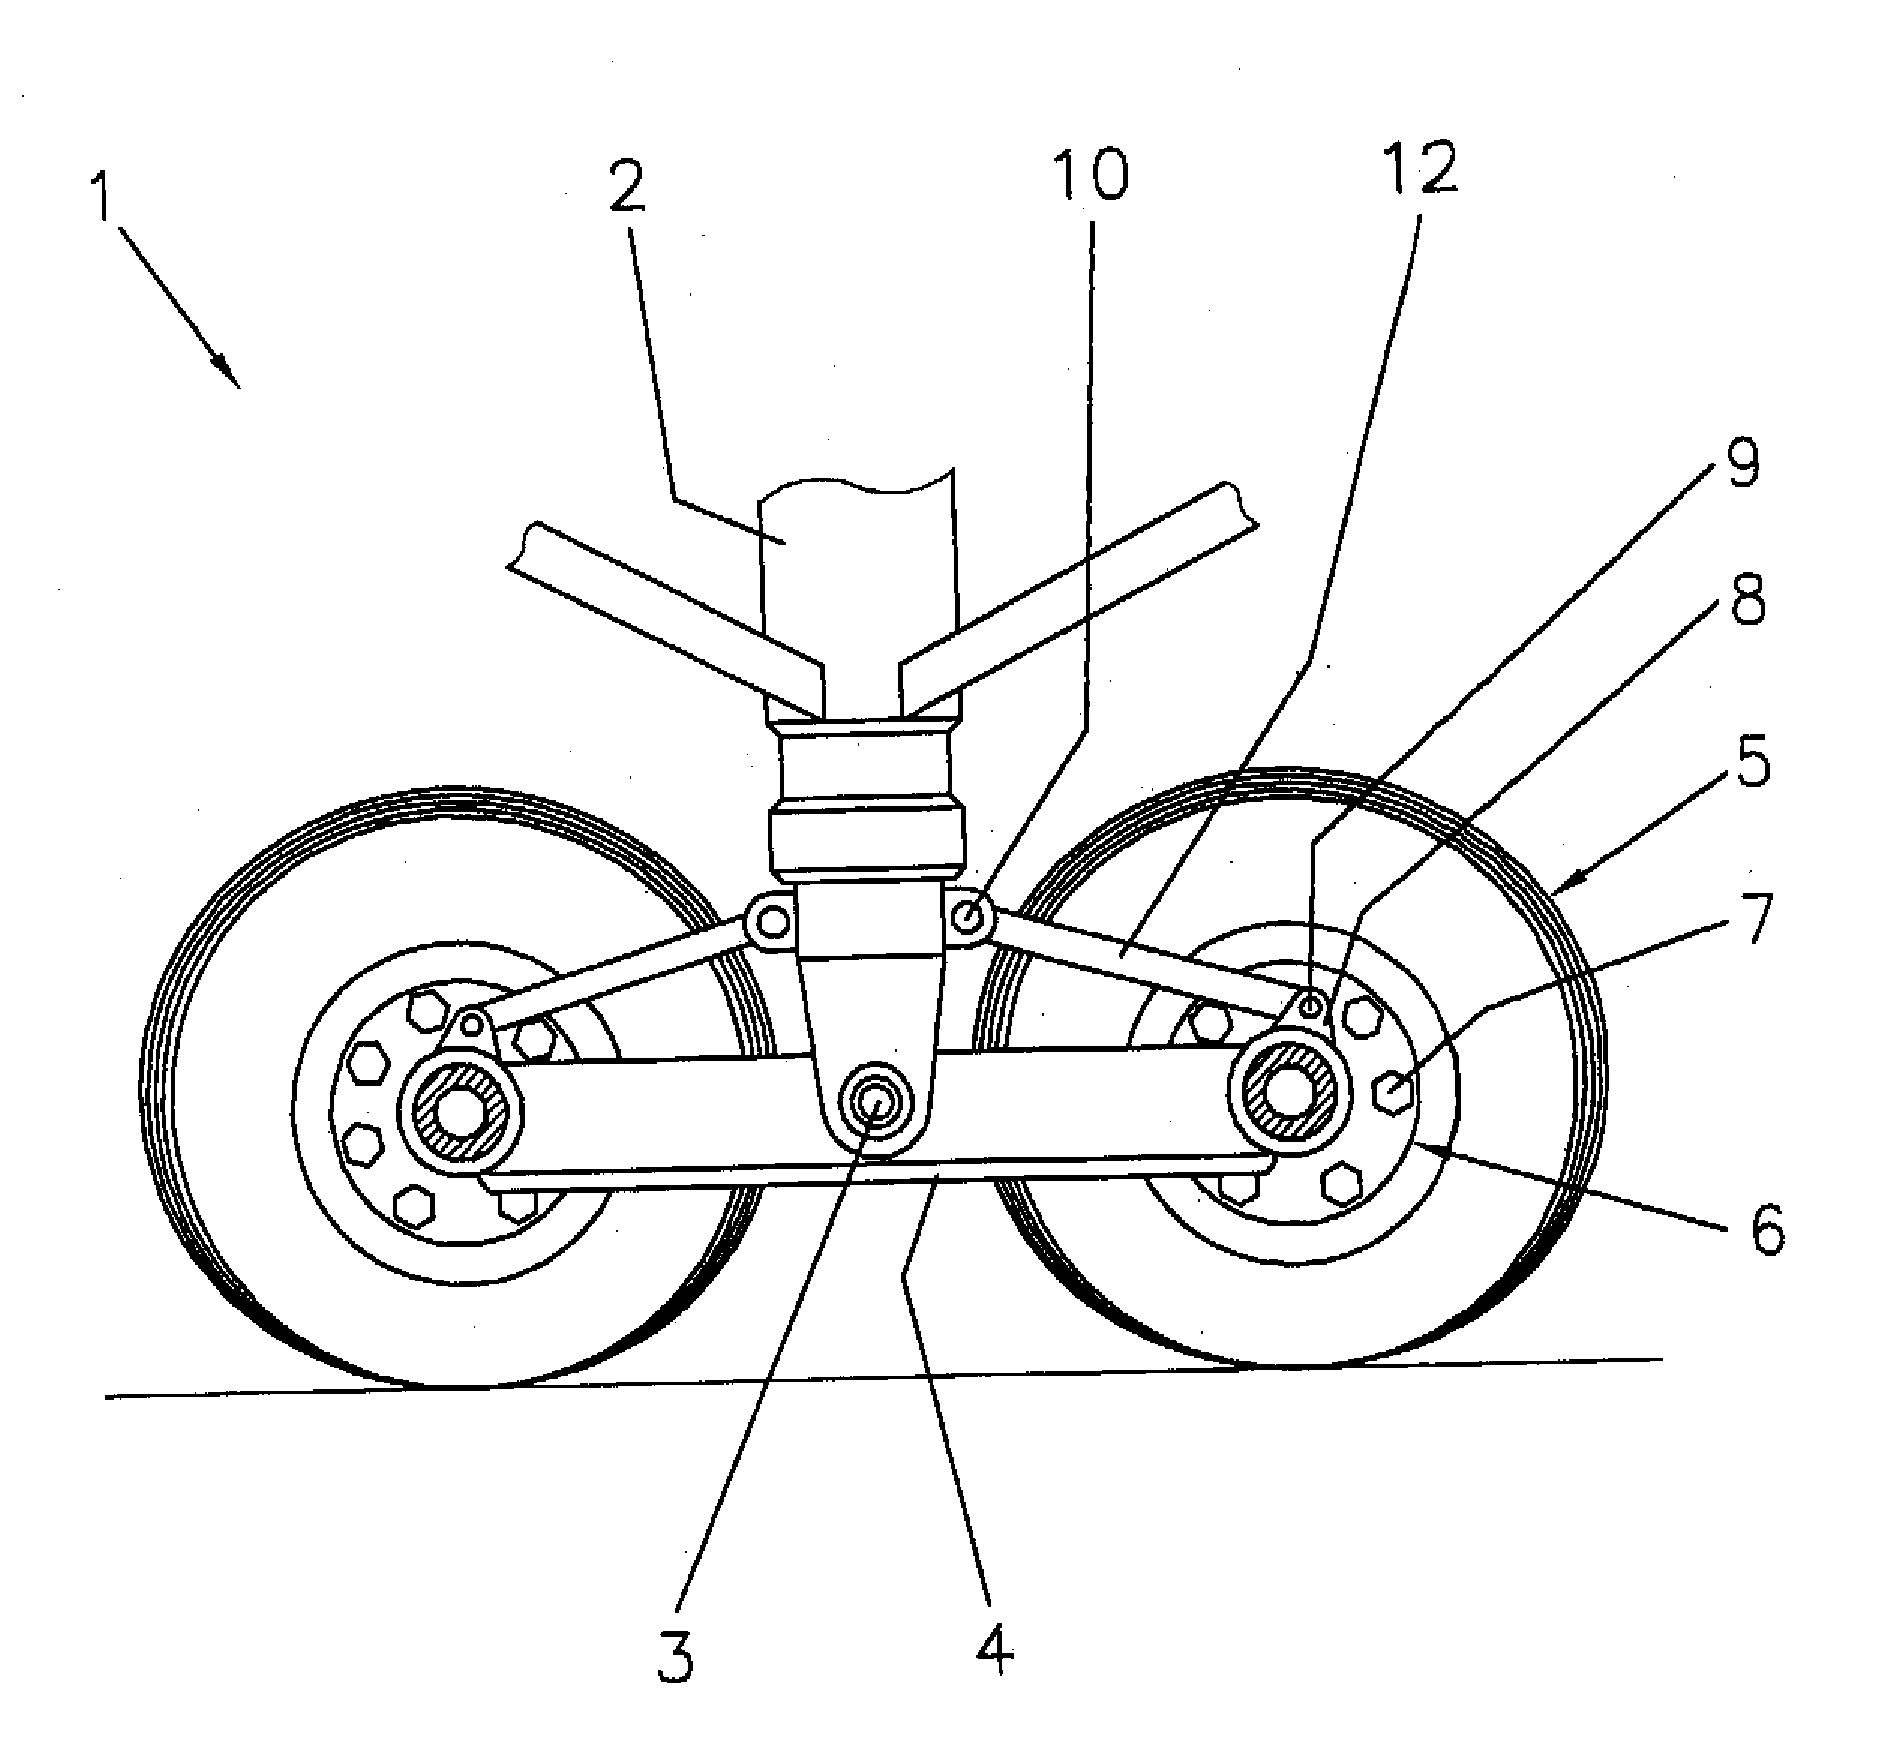 Force-sensing device for vehicle running gears